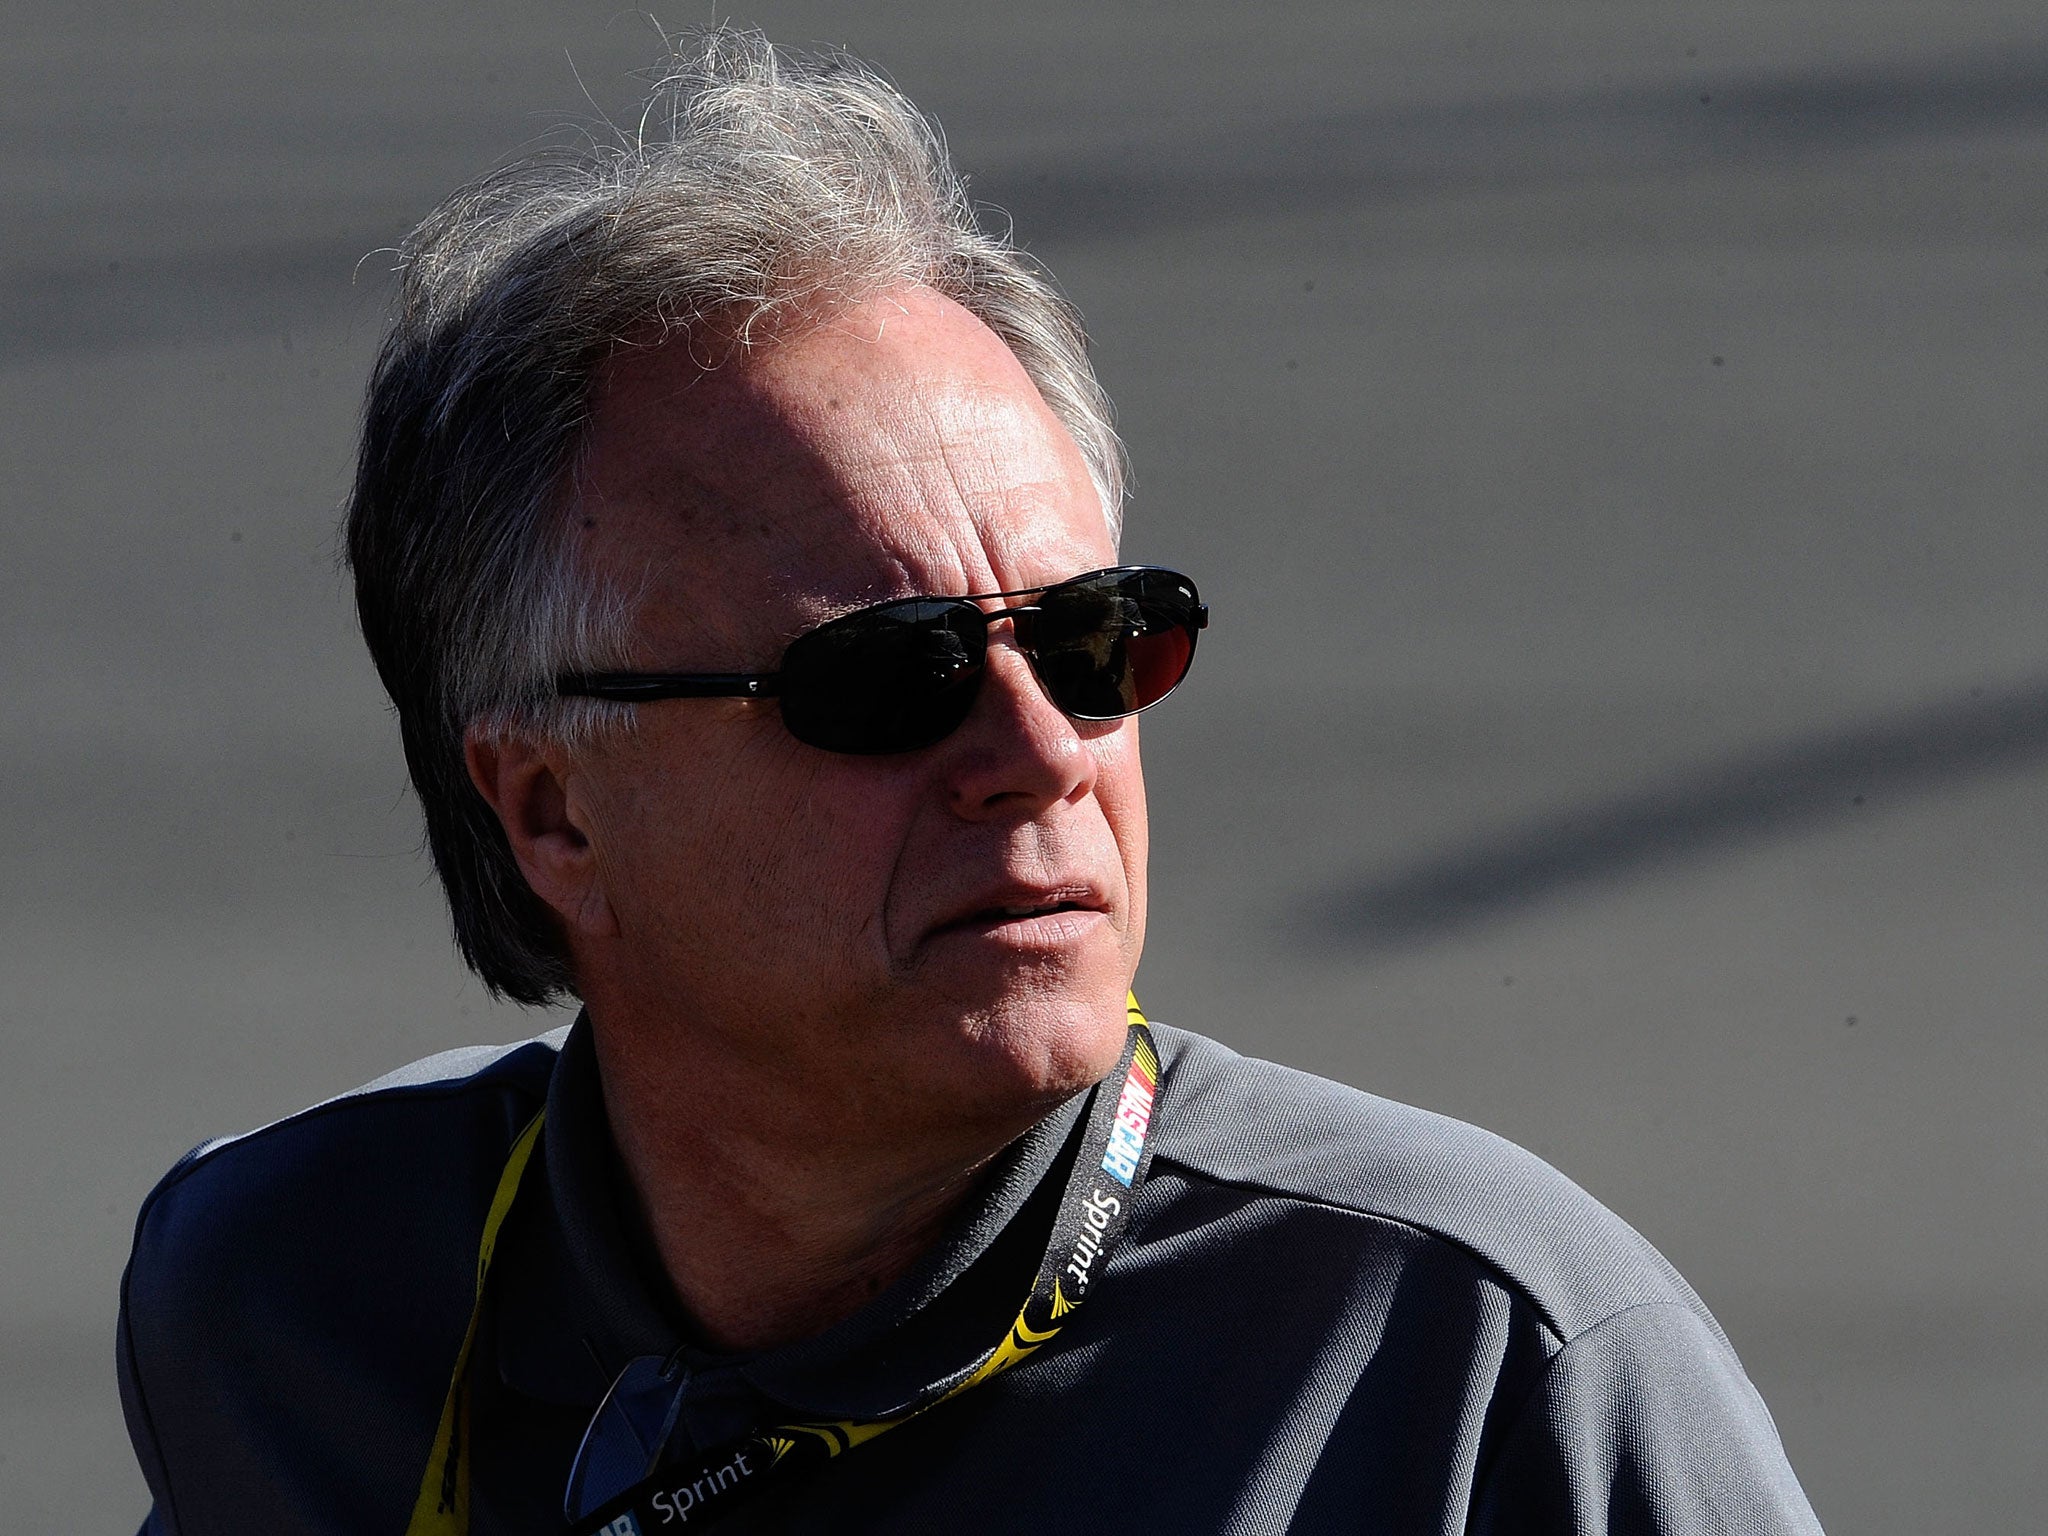 NASCAR team owner Gene Haas could launch a bid for a place on the F1 grid